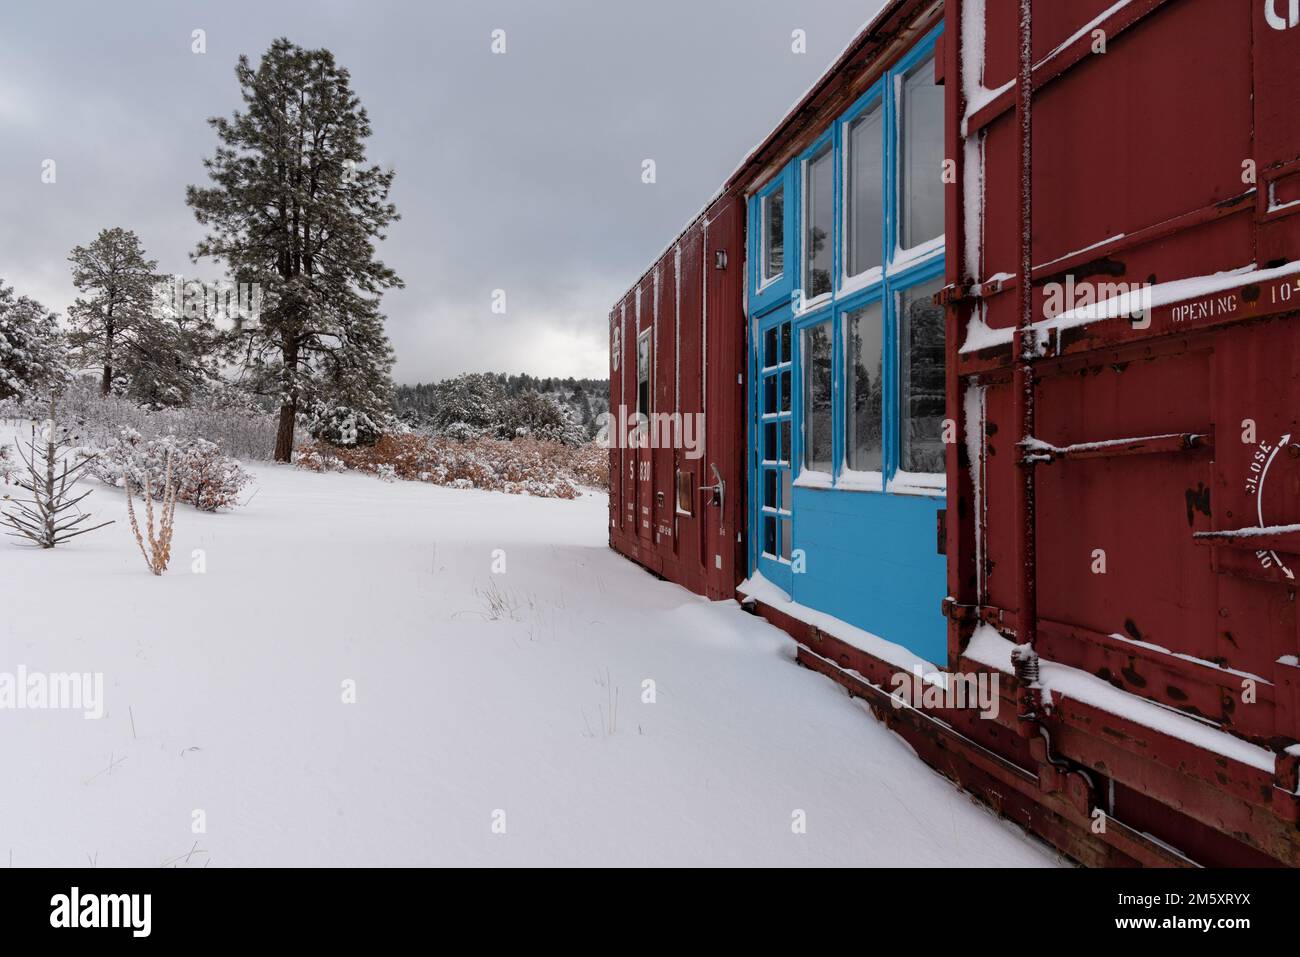 Dark red train car with large windows and doors framed with turquoise-colored doors and windows in a snowy landscape in Northern New Mexico. Stock Photo